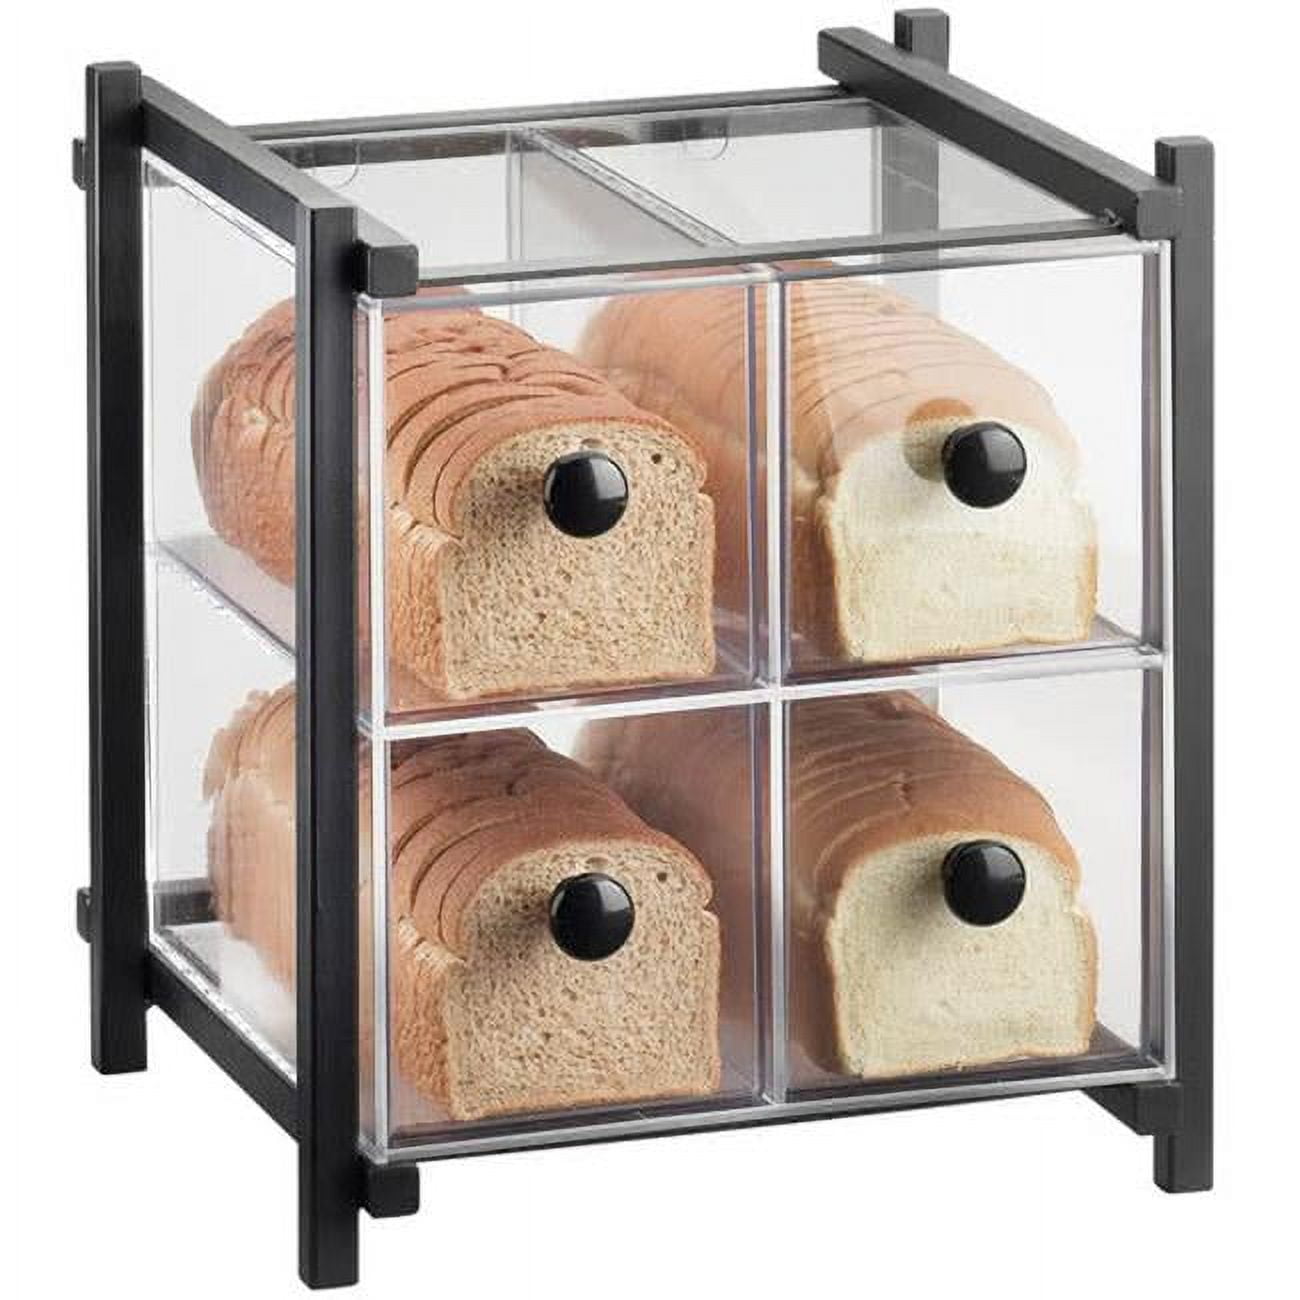 1146-13 One By One Four Drawer Bread Display Case, Black - 14 X 14.75 X 15.625 In.